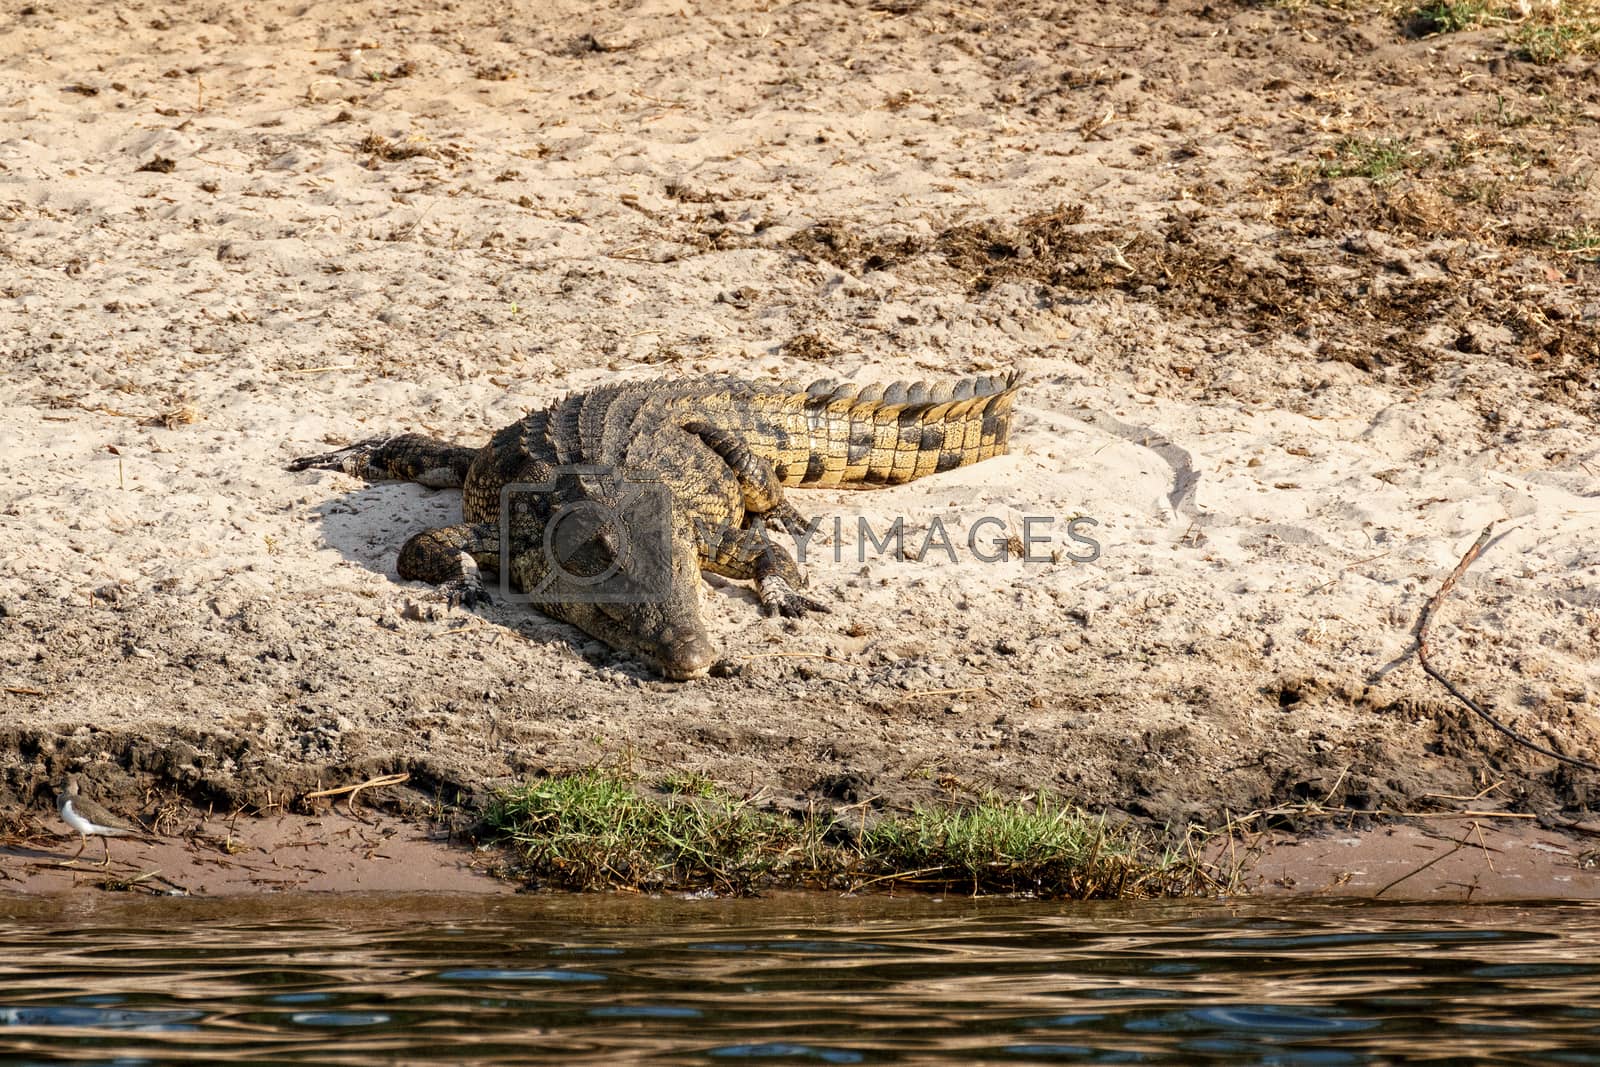 Royalty free image of Portrait of a Nile Crocodile by artush